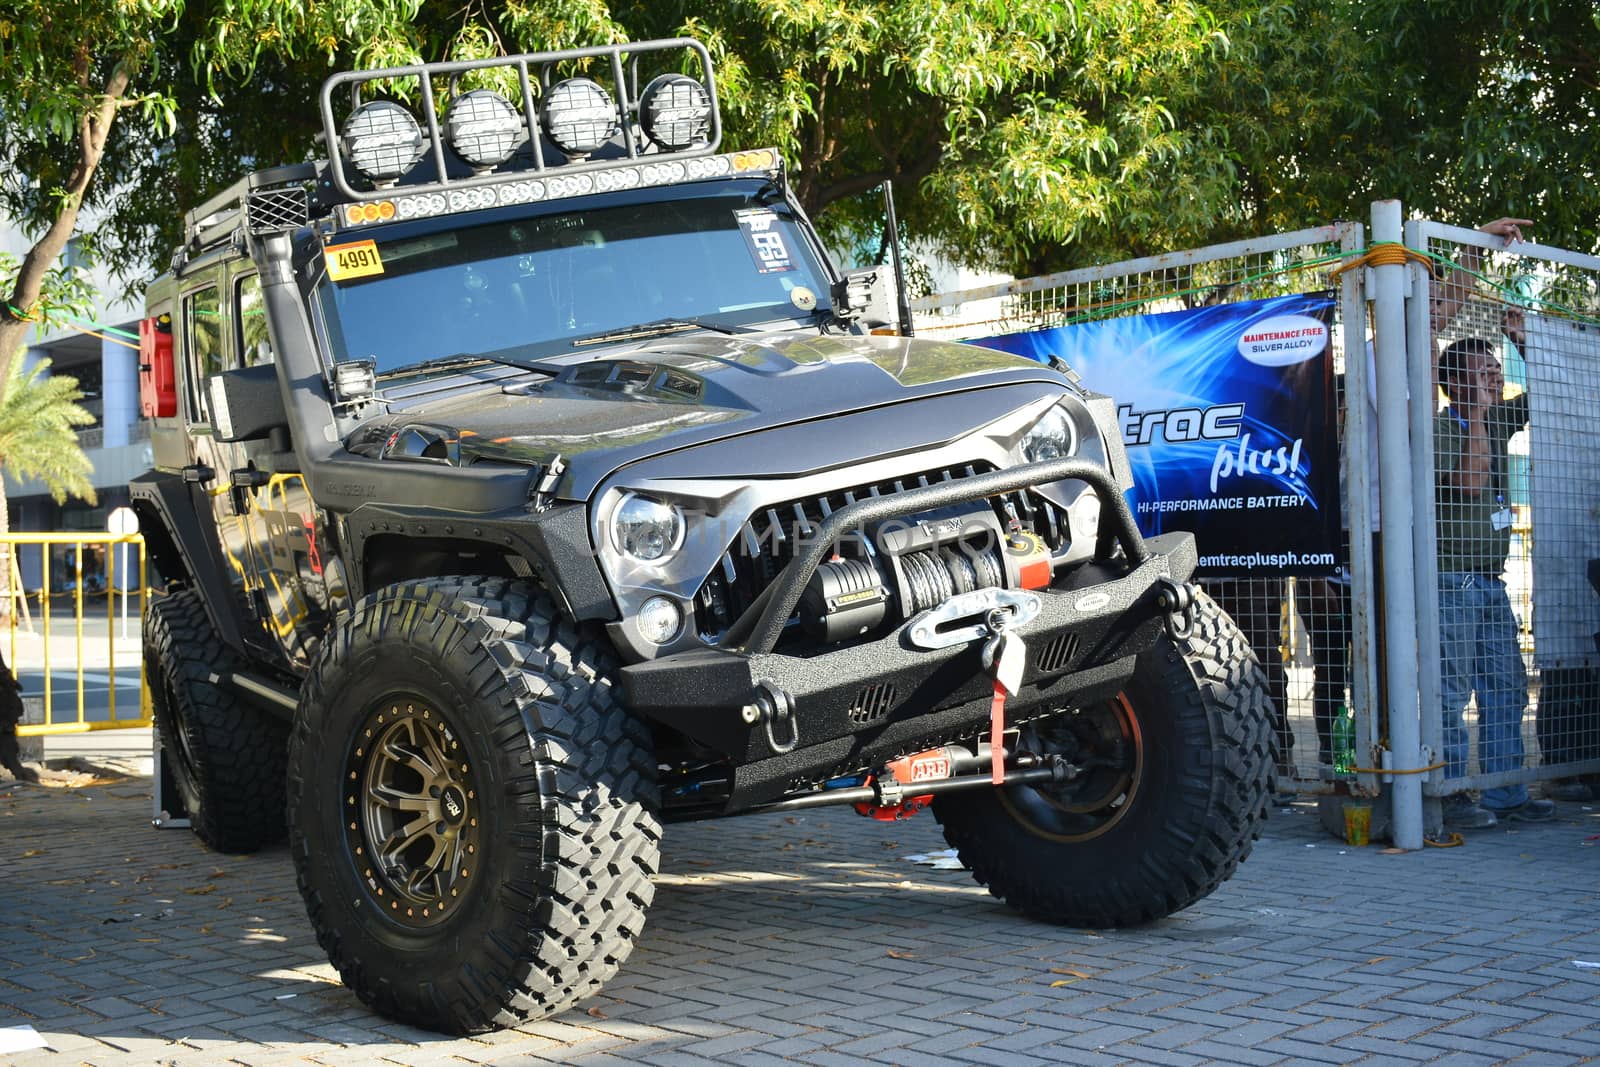 Jeep wrangler at Bumper to Bumper car show in Pasay, Philippines by imwaltersy